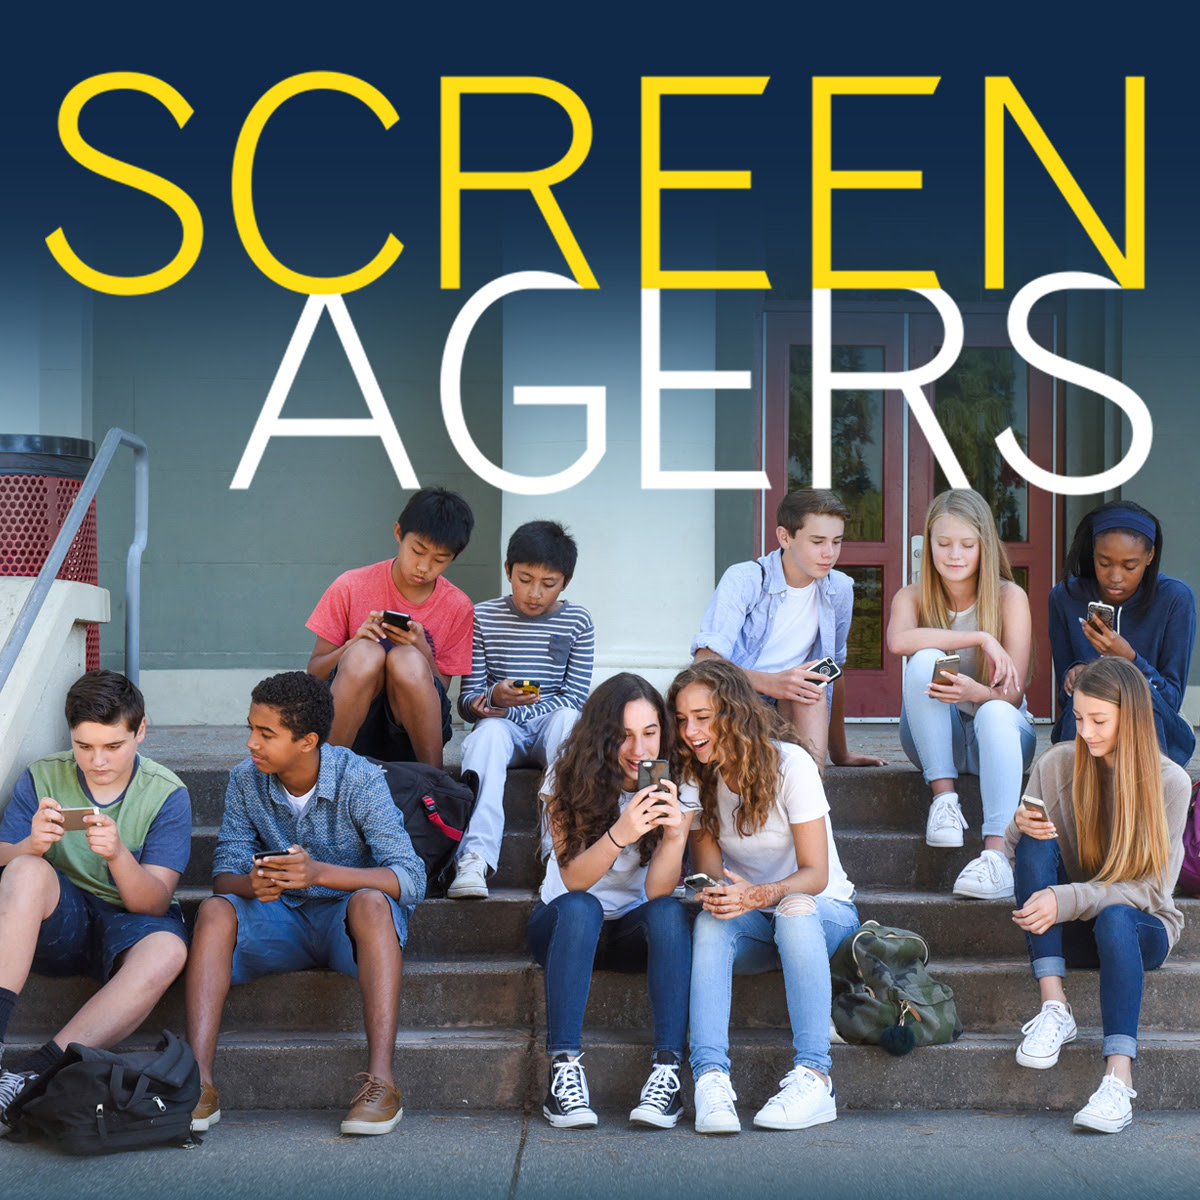 Screenagers Film Presented By Lloydminster Roman Catholic Separate School Division #89 & FCSS